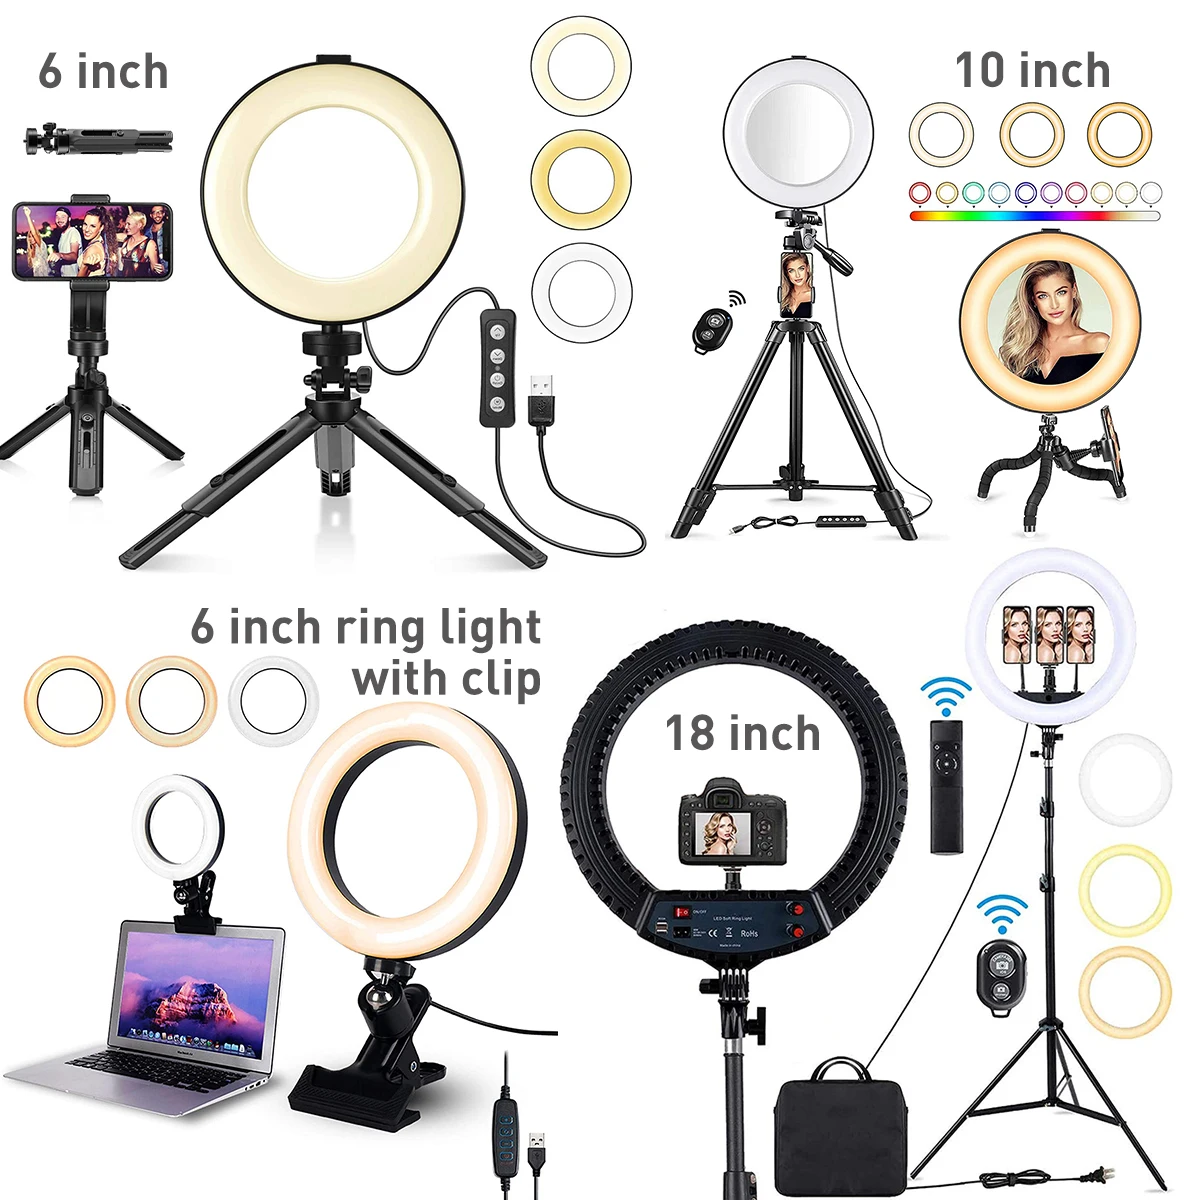 

Beauty MINI Tripod Stand Dimmable Desktop Ringlight Selfie Circle Led Lamp Light 26CM 10 Inch Ring Light with Phone Holder